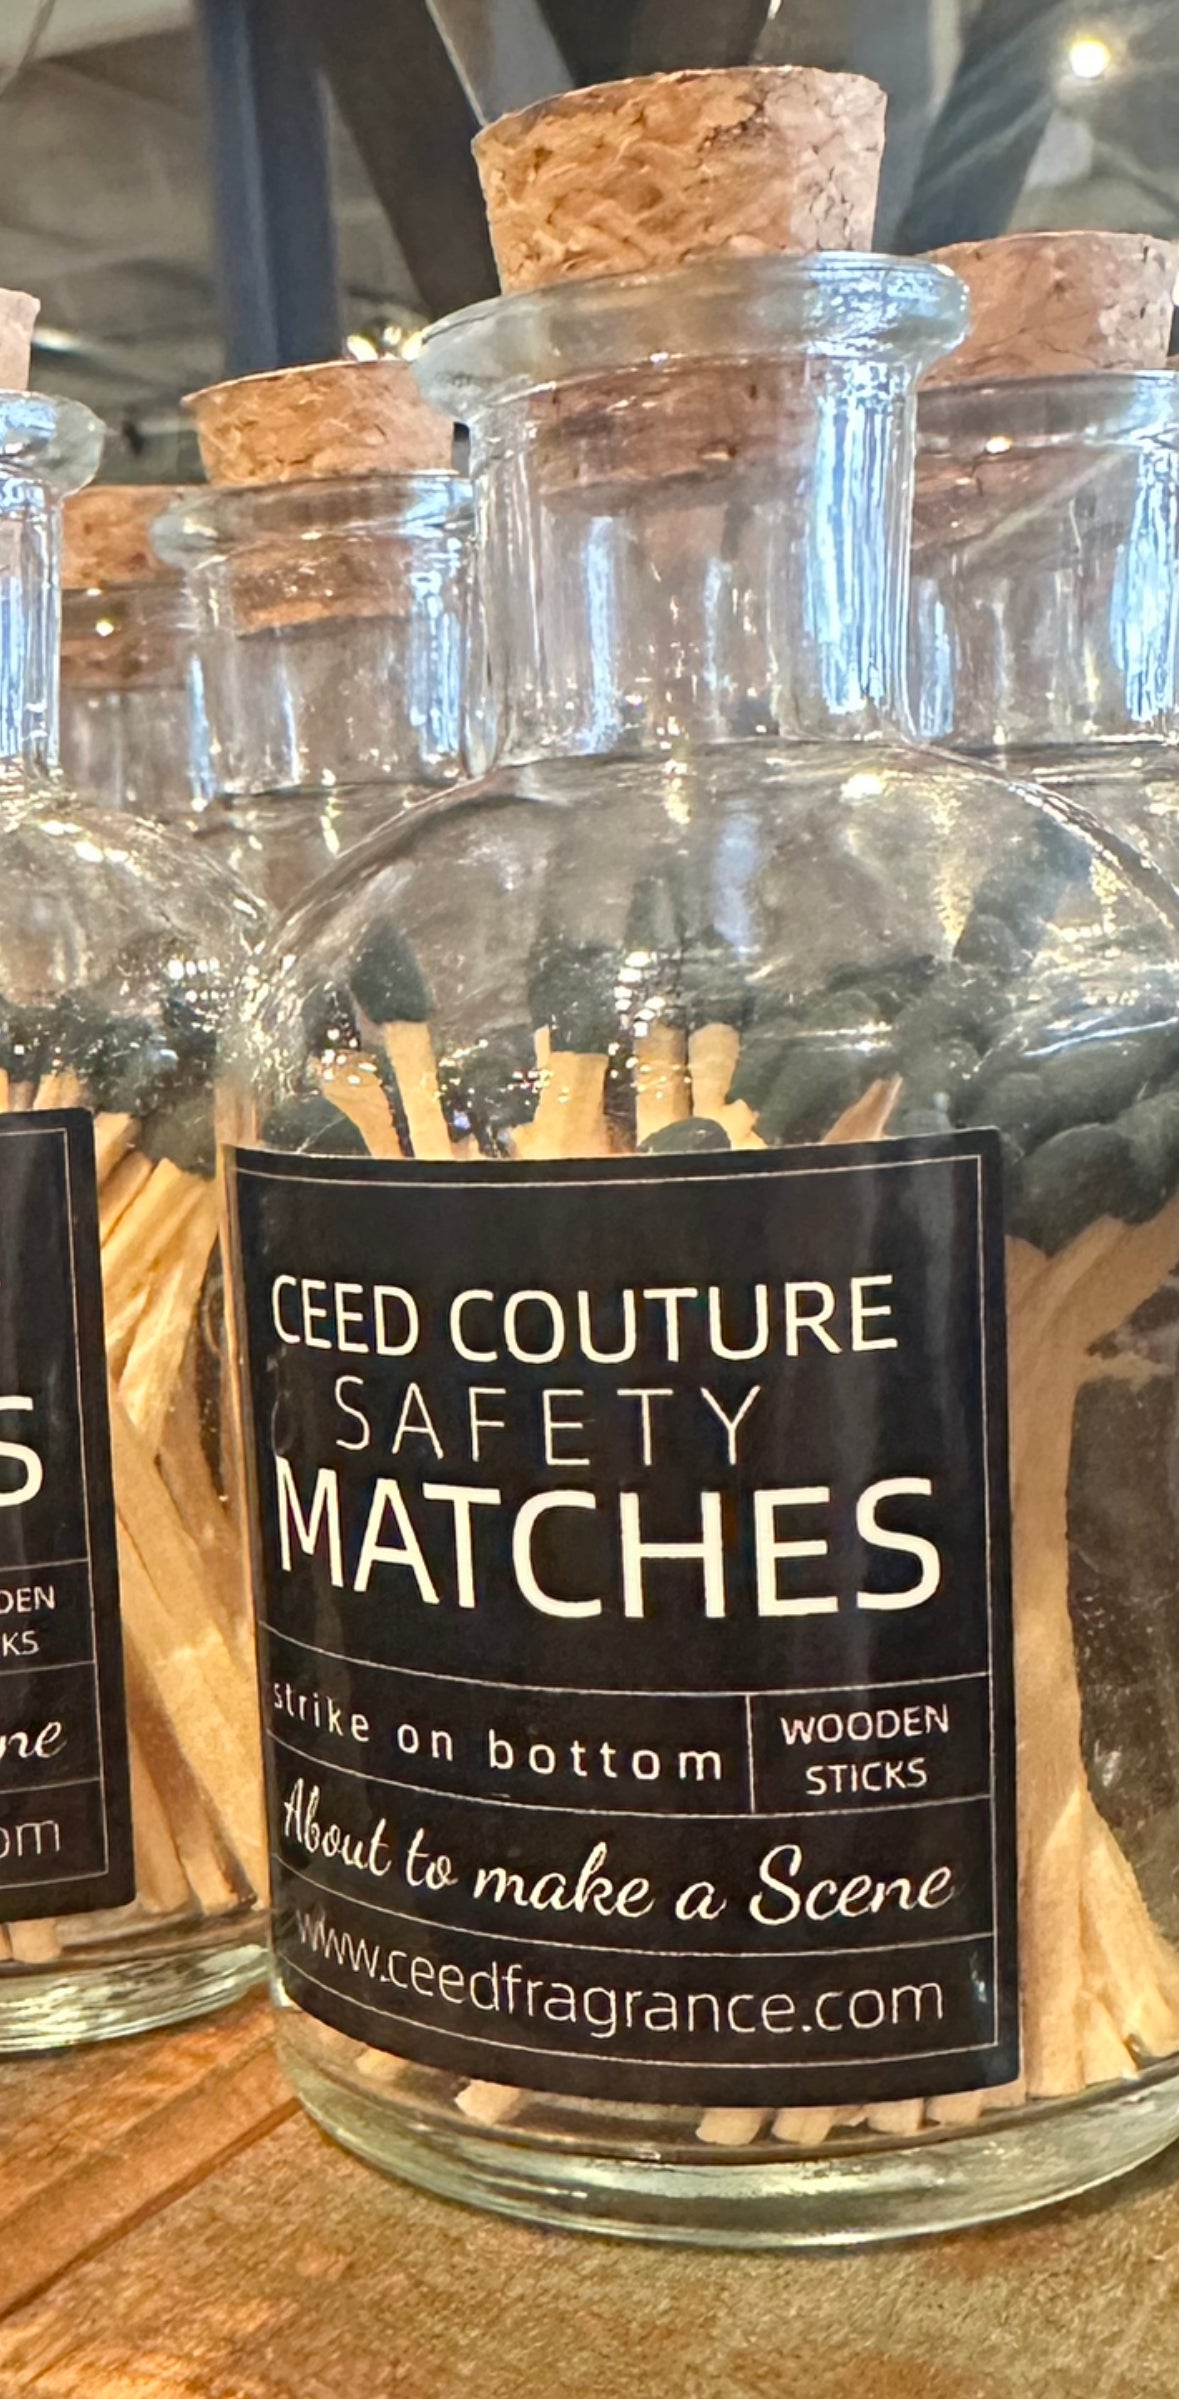 CEED COUTURE MATCHES